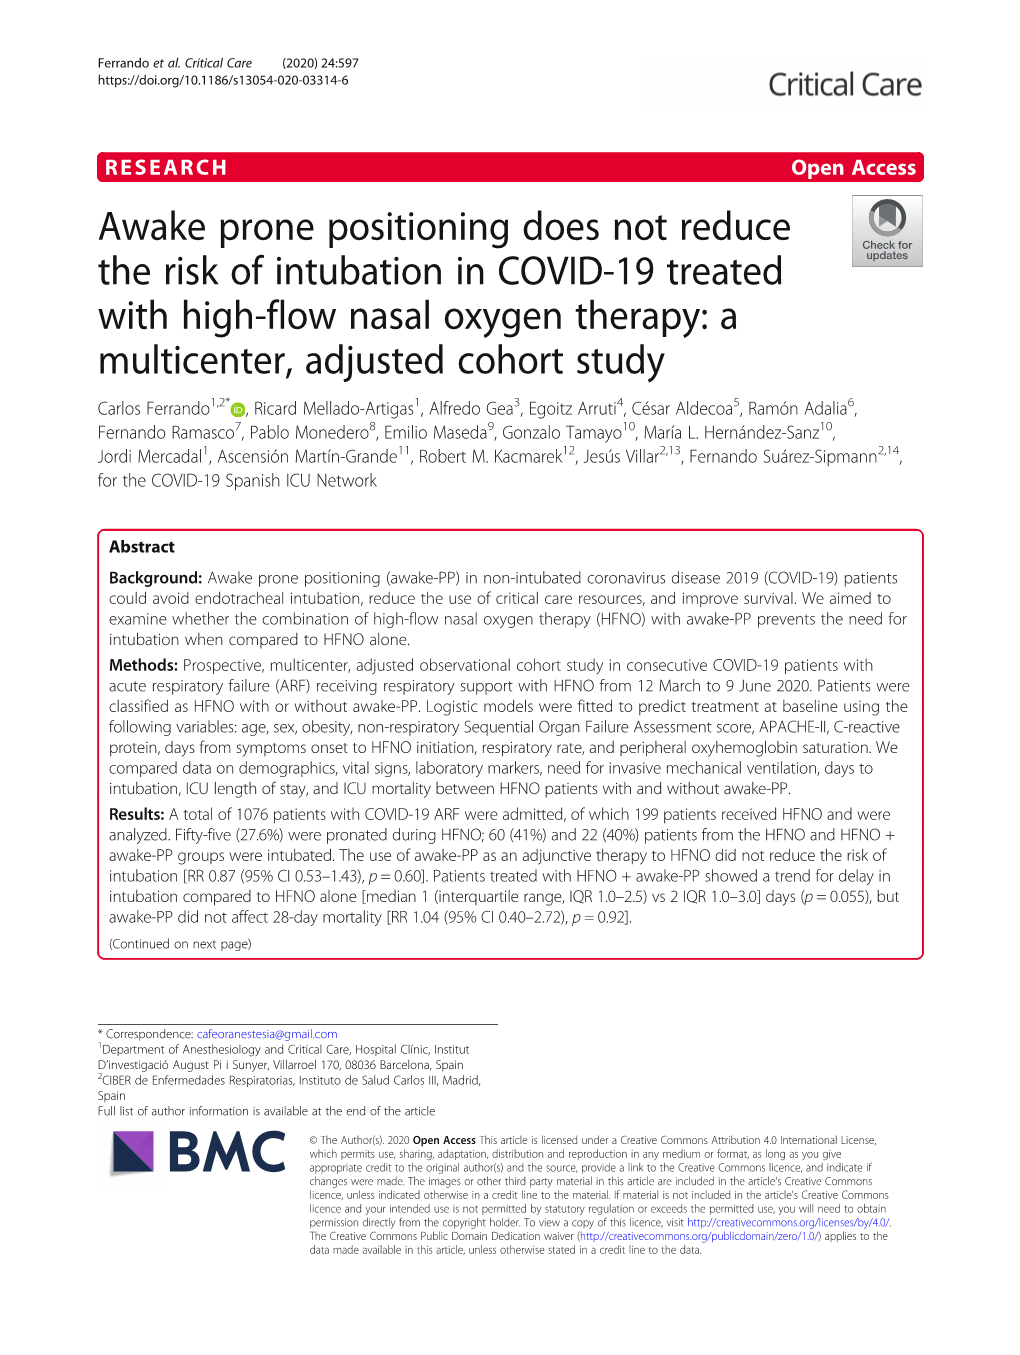 Awake Prone Positioning Does Not Reduce the Risk of Intubation in COVID-19 Treated with High-Flow Nasal Oxygen Therapy